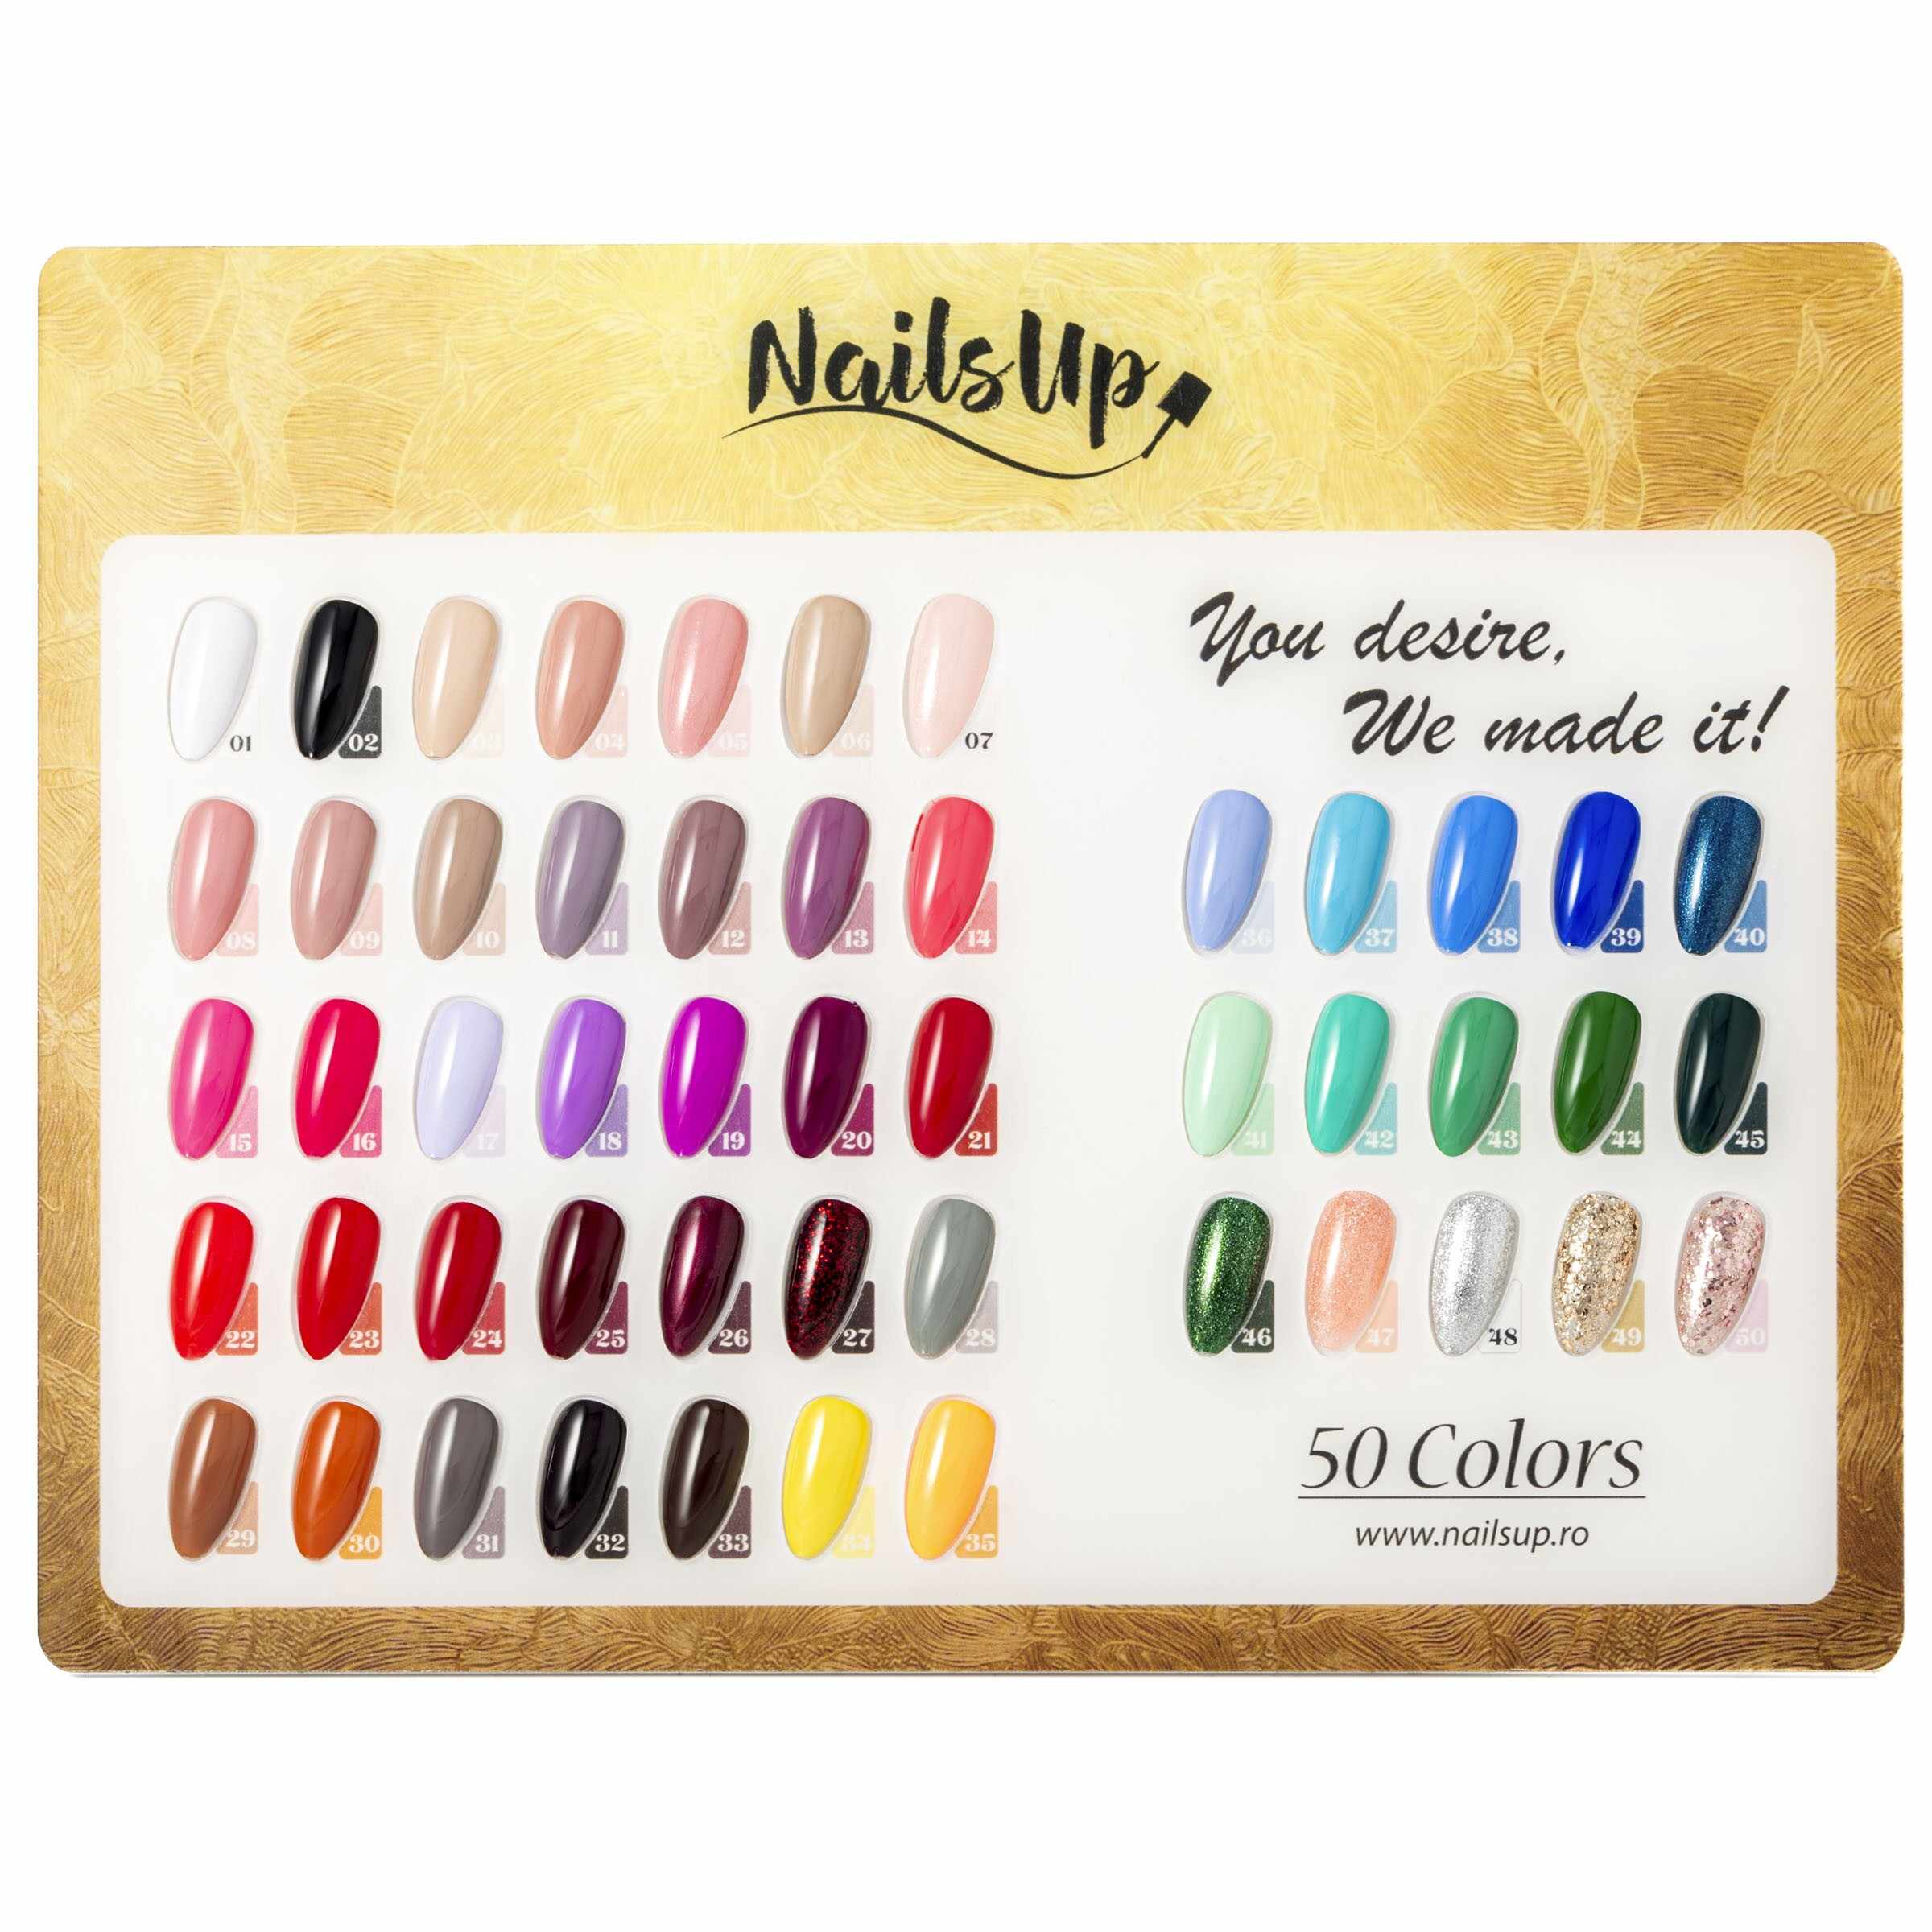 Catalog Nailsup Gold is Your Reflection